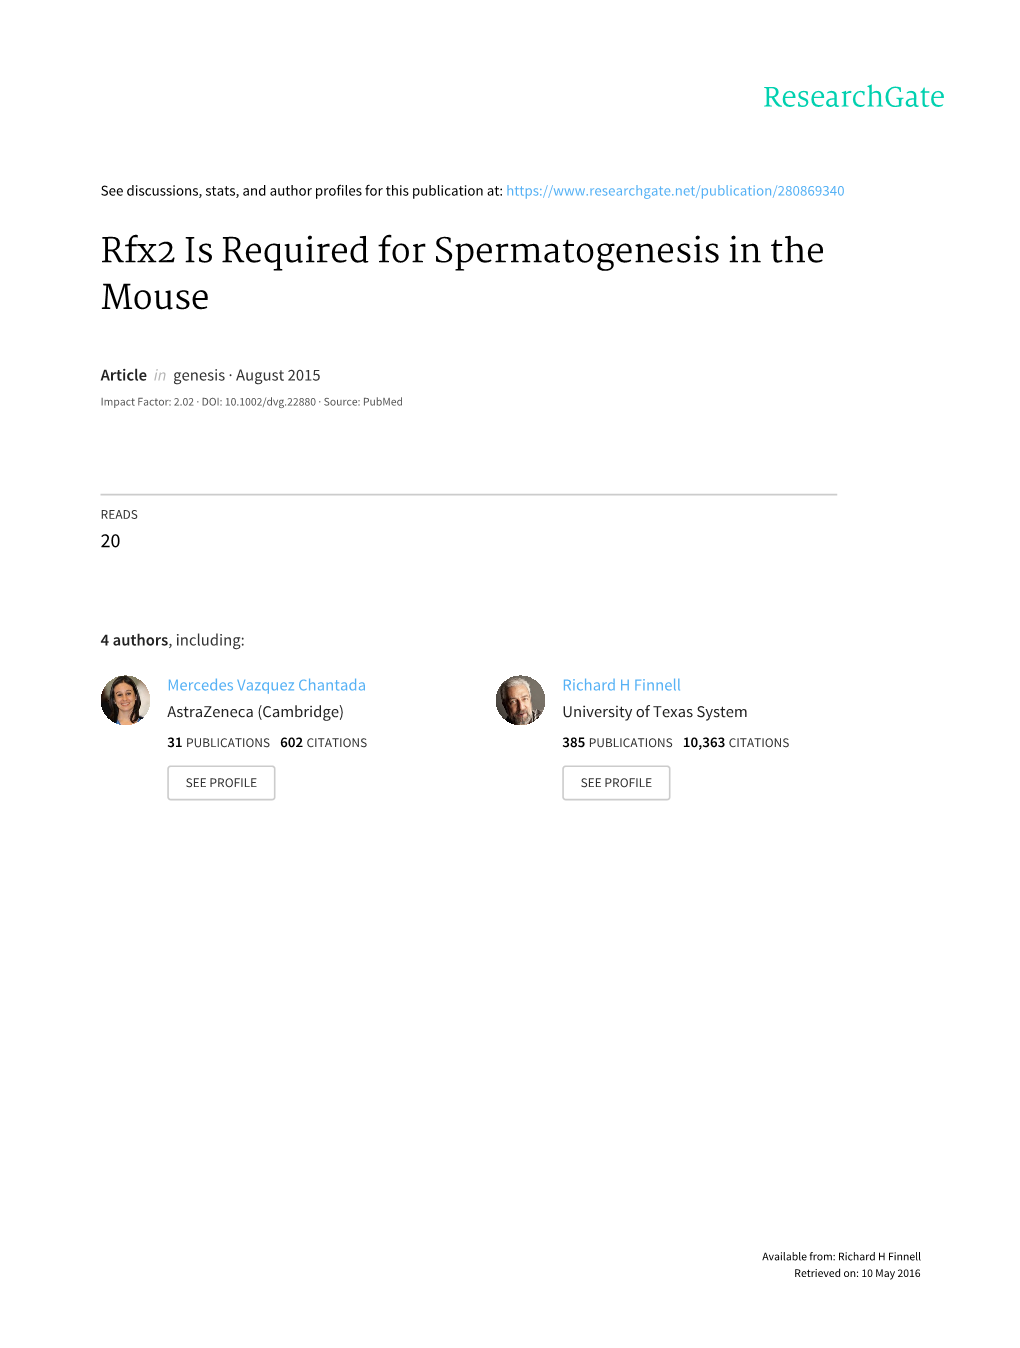 Rfx2 Is Required for Spermatogenesis in the Mouse